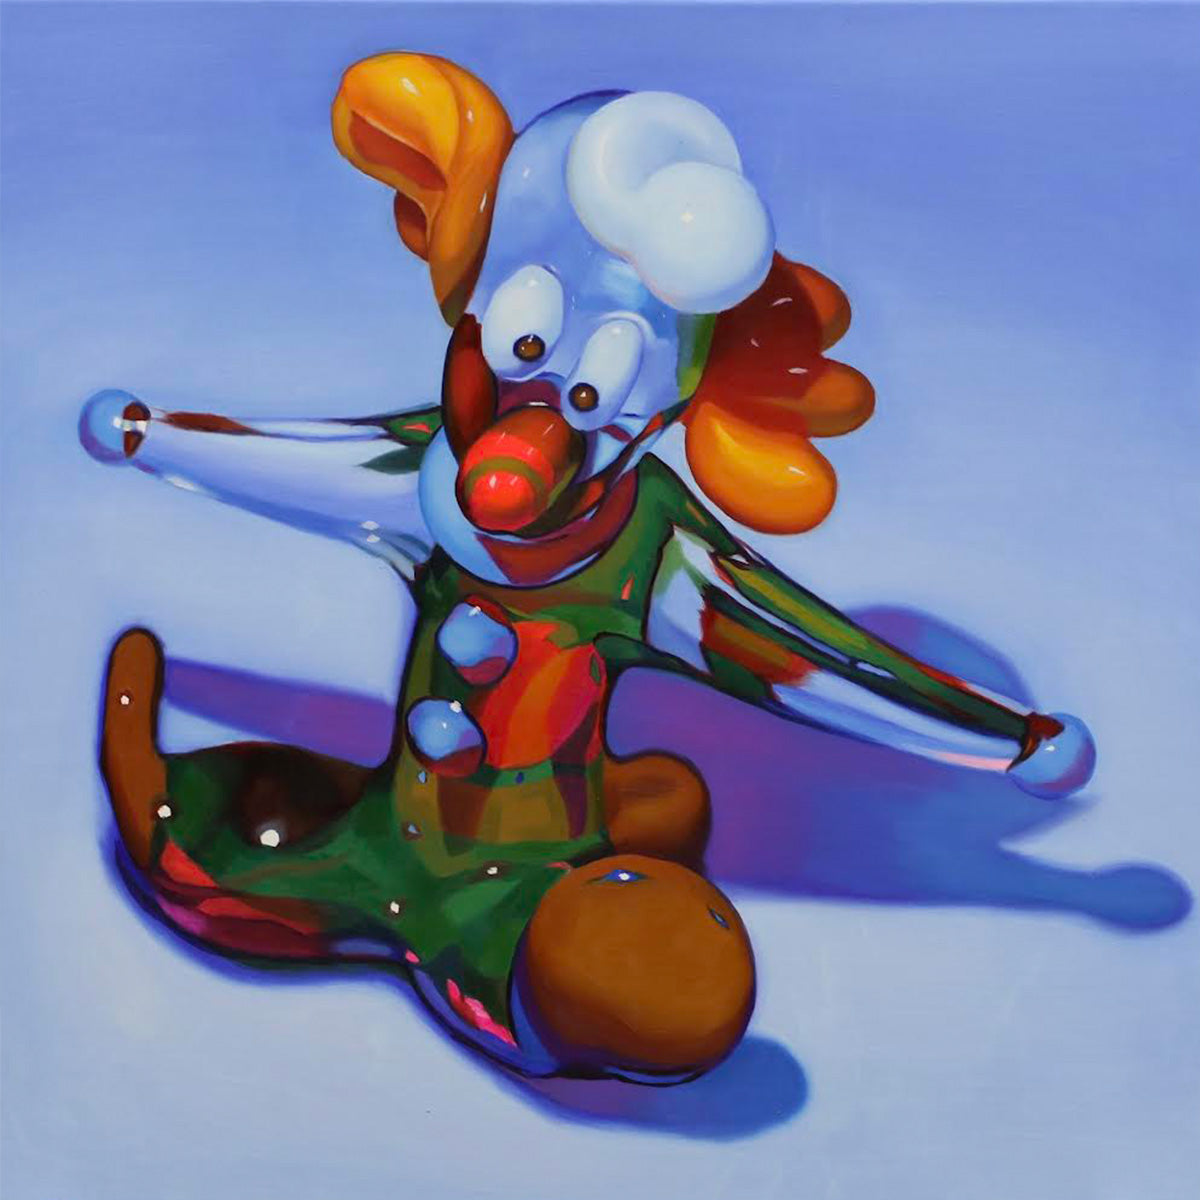 absolute difference series “Glass clown”